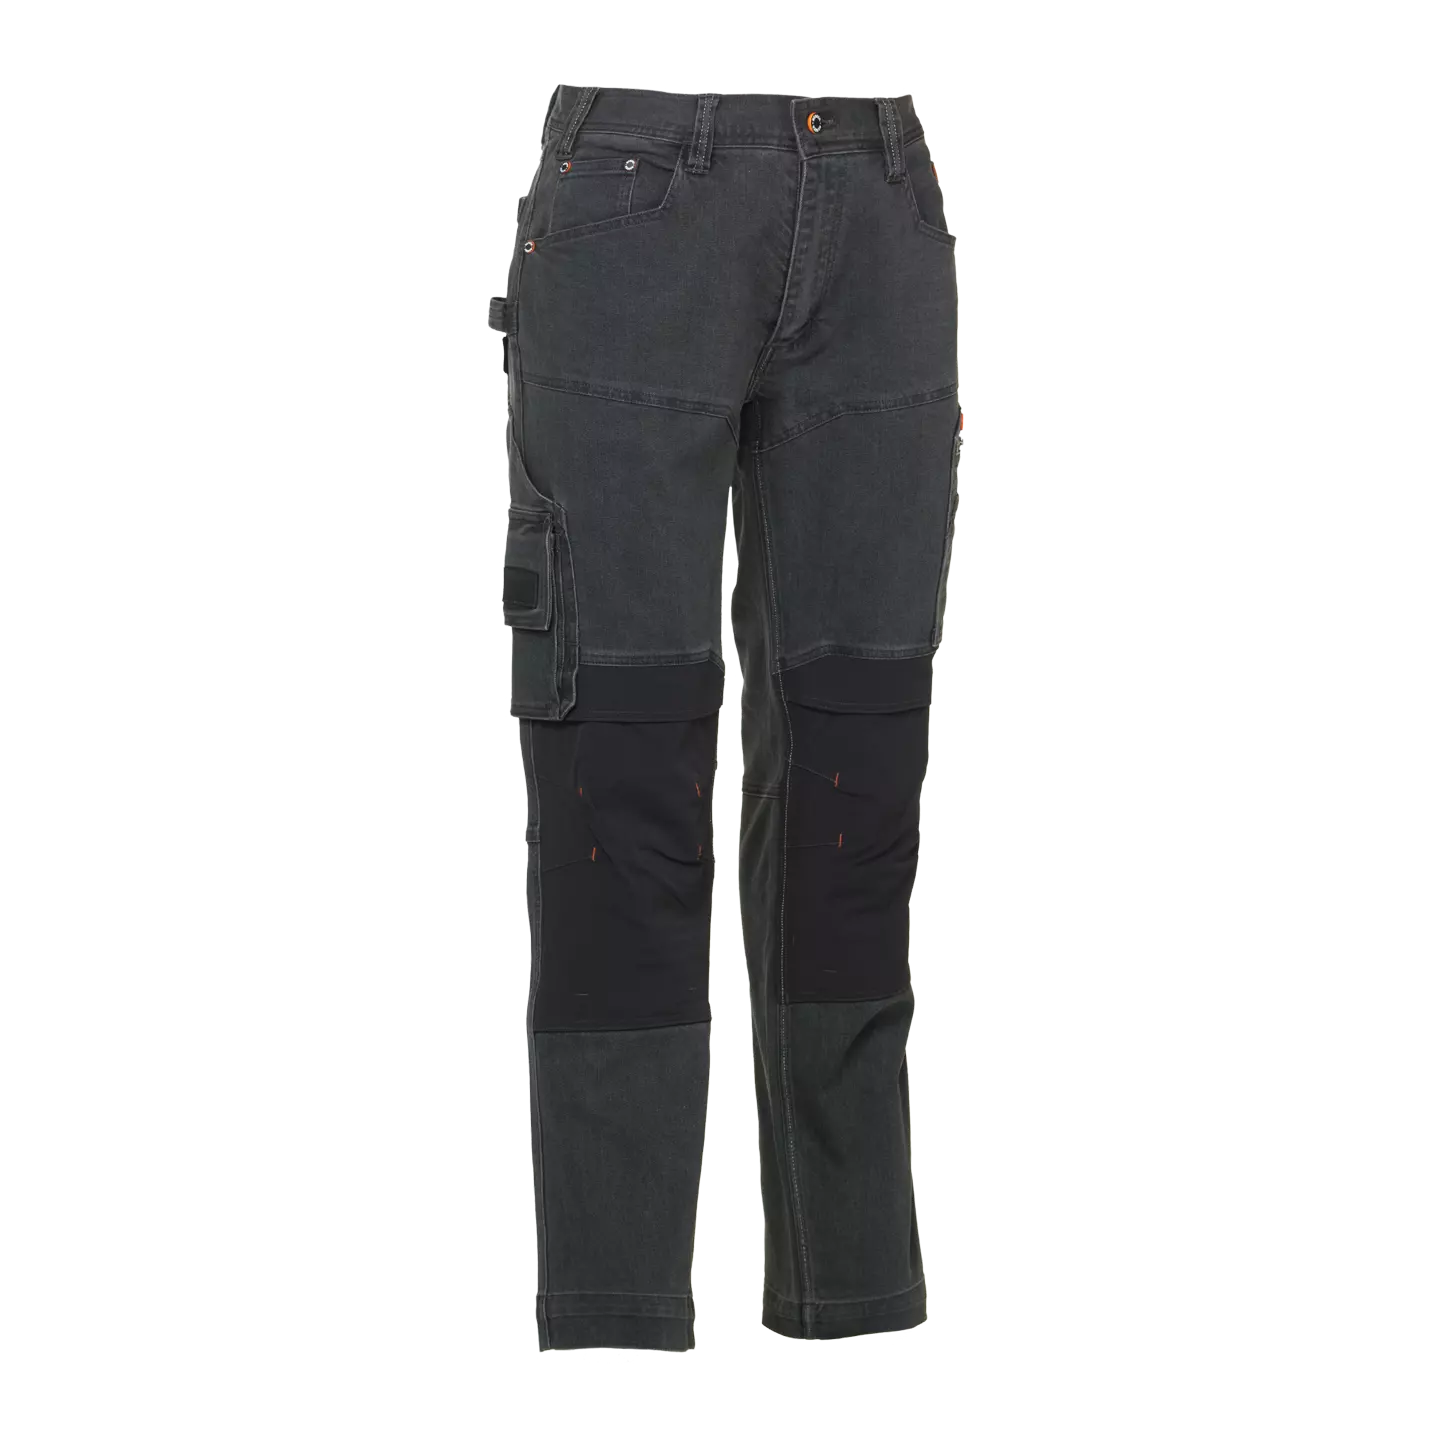 Sphinx Trousers Grey Jeans 54